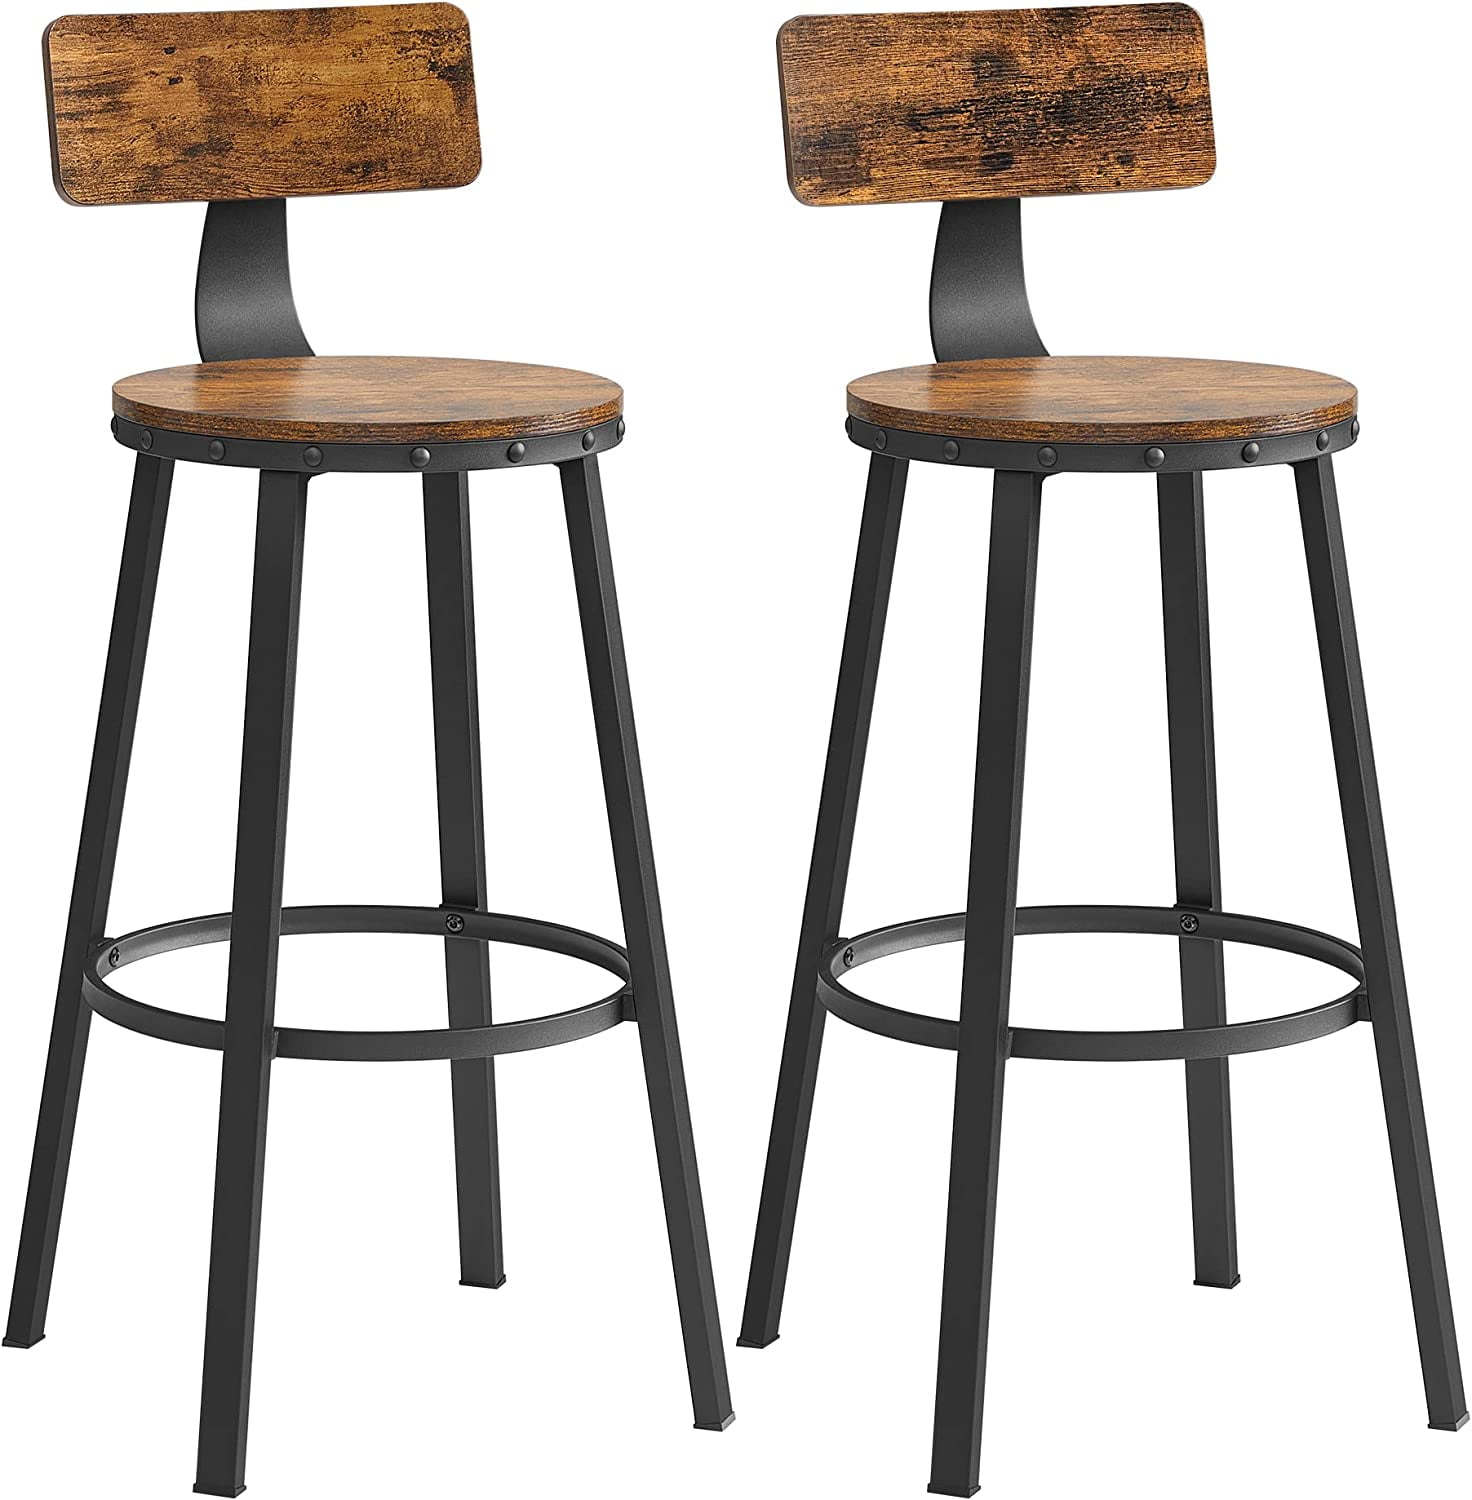 VASAGLE Bar Stools Set of 2 Bar Chairs Kitchen Breakfast Bar Stools with  Footrest Industrial in Living Room Party Room Brown and Black 